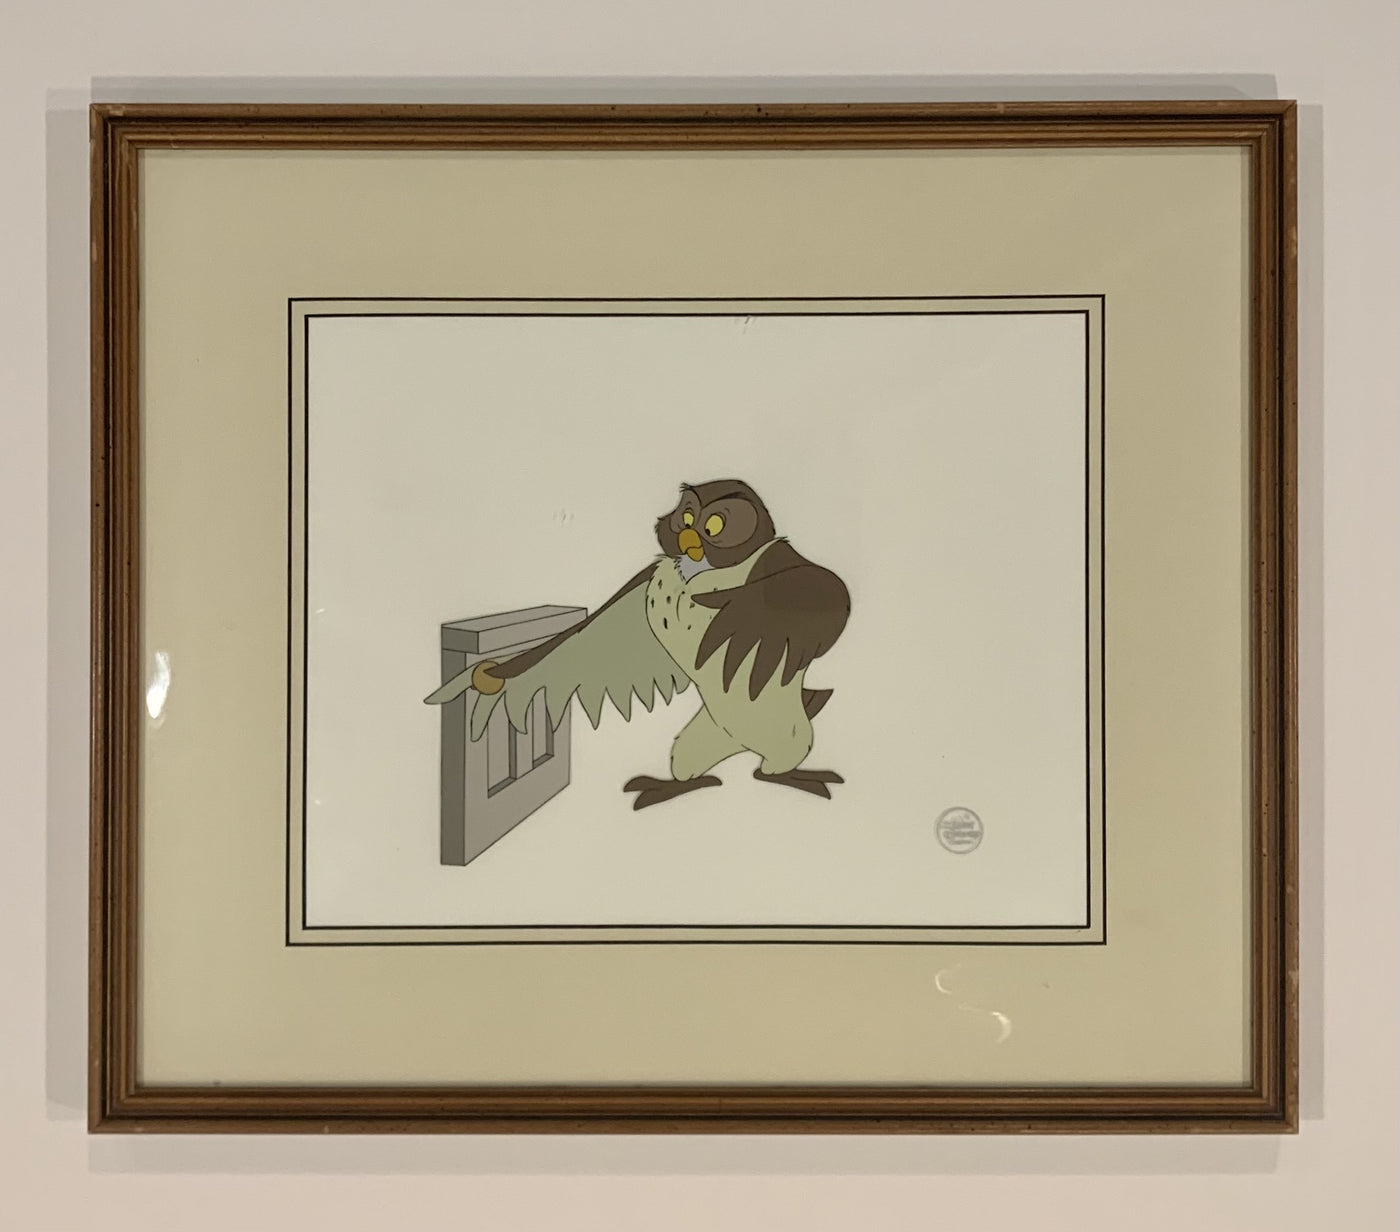 Original Walt Disney Production Cel of Owl from The New Adventures of Winnie the Pooh